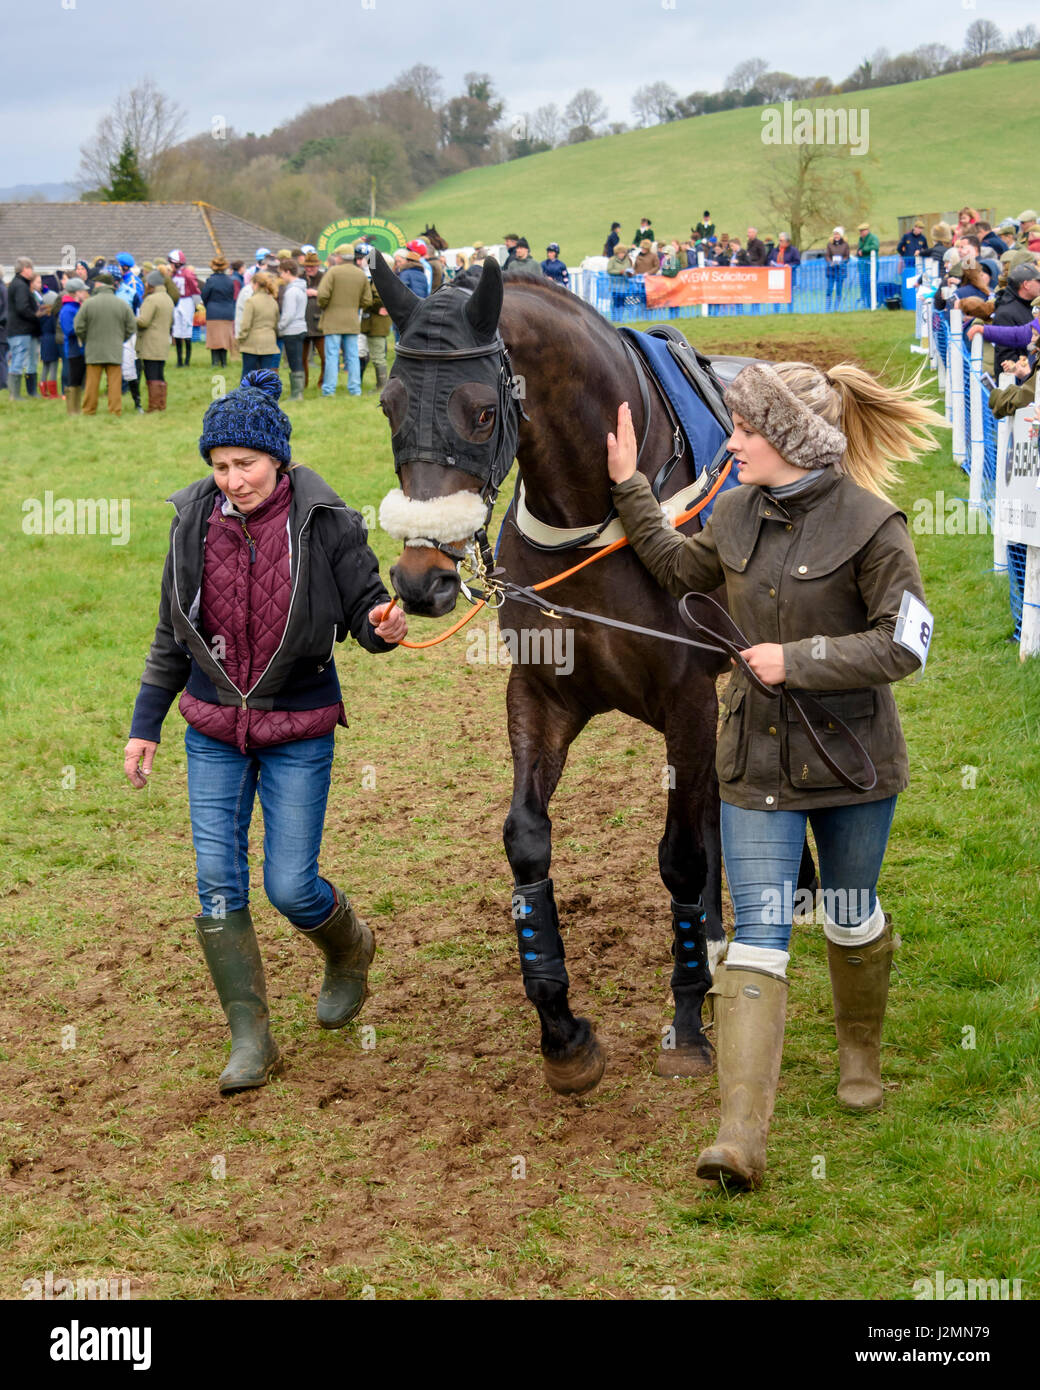 Horse at a point-to-point event, being lead around the paddock by its handlers Stock Photo